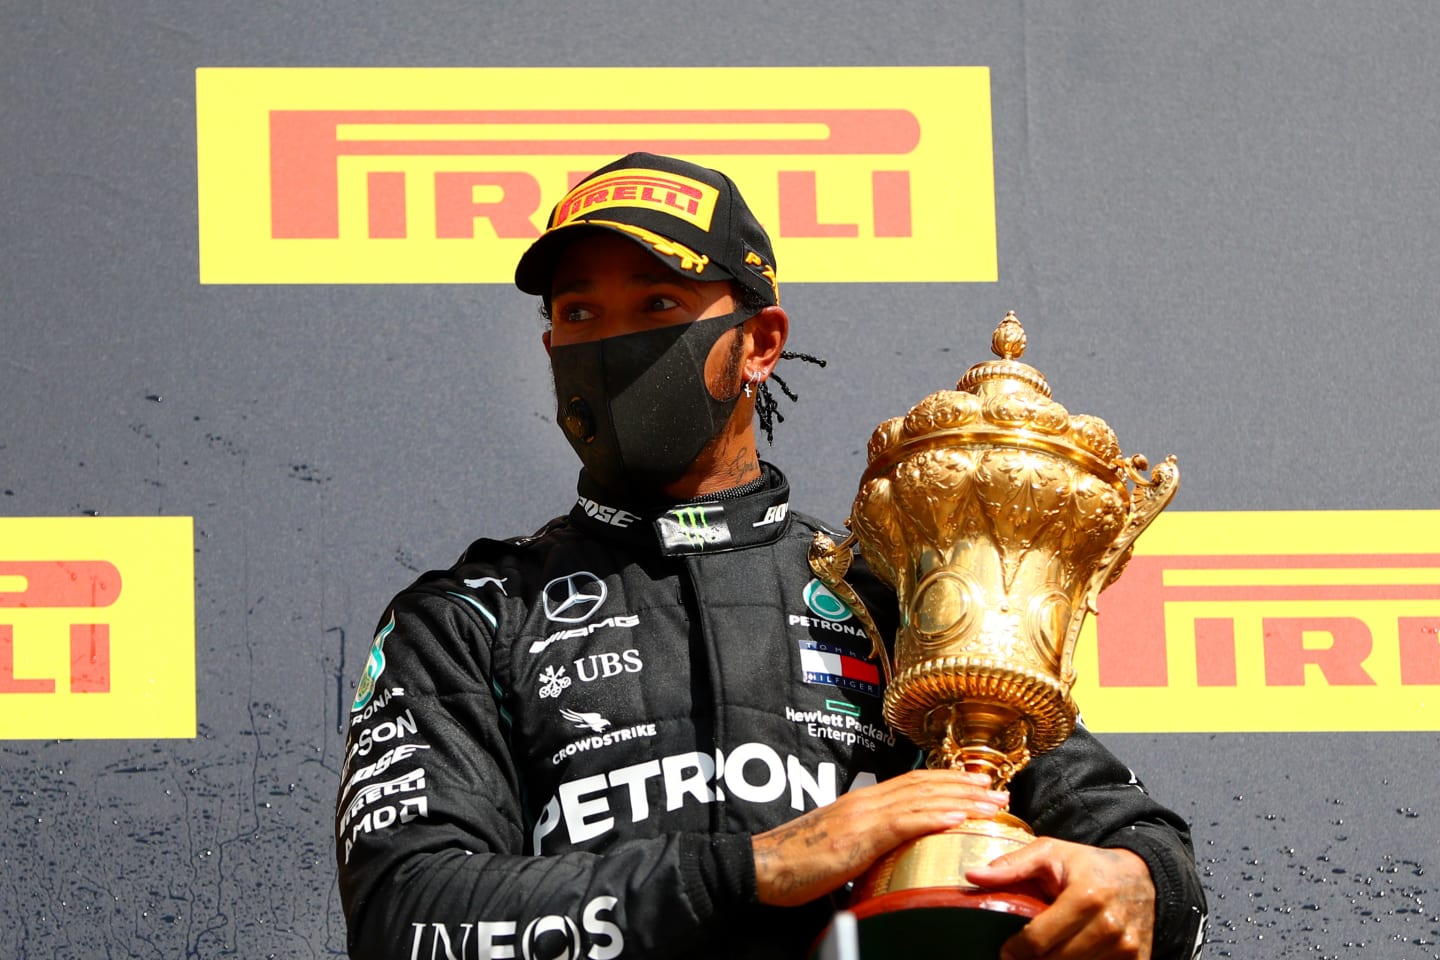 NORTHAMPTON, ENGLAND - AUGUST 02: Lewis Hamilton of Great Britain and Mercedes GP celebrates on the podium after winning the Formula One Grand Prix of Hungary at Silverstone on August 02, 2020 in Northampton, England. (Photo by Dan Istitene - Formula 1/Formula 1 via Getty Images)